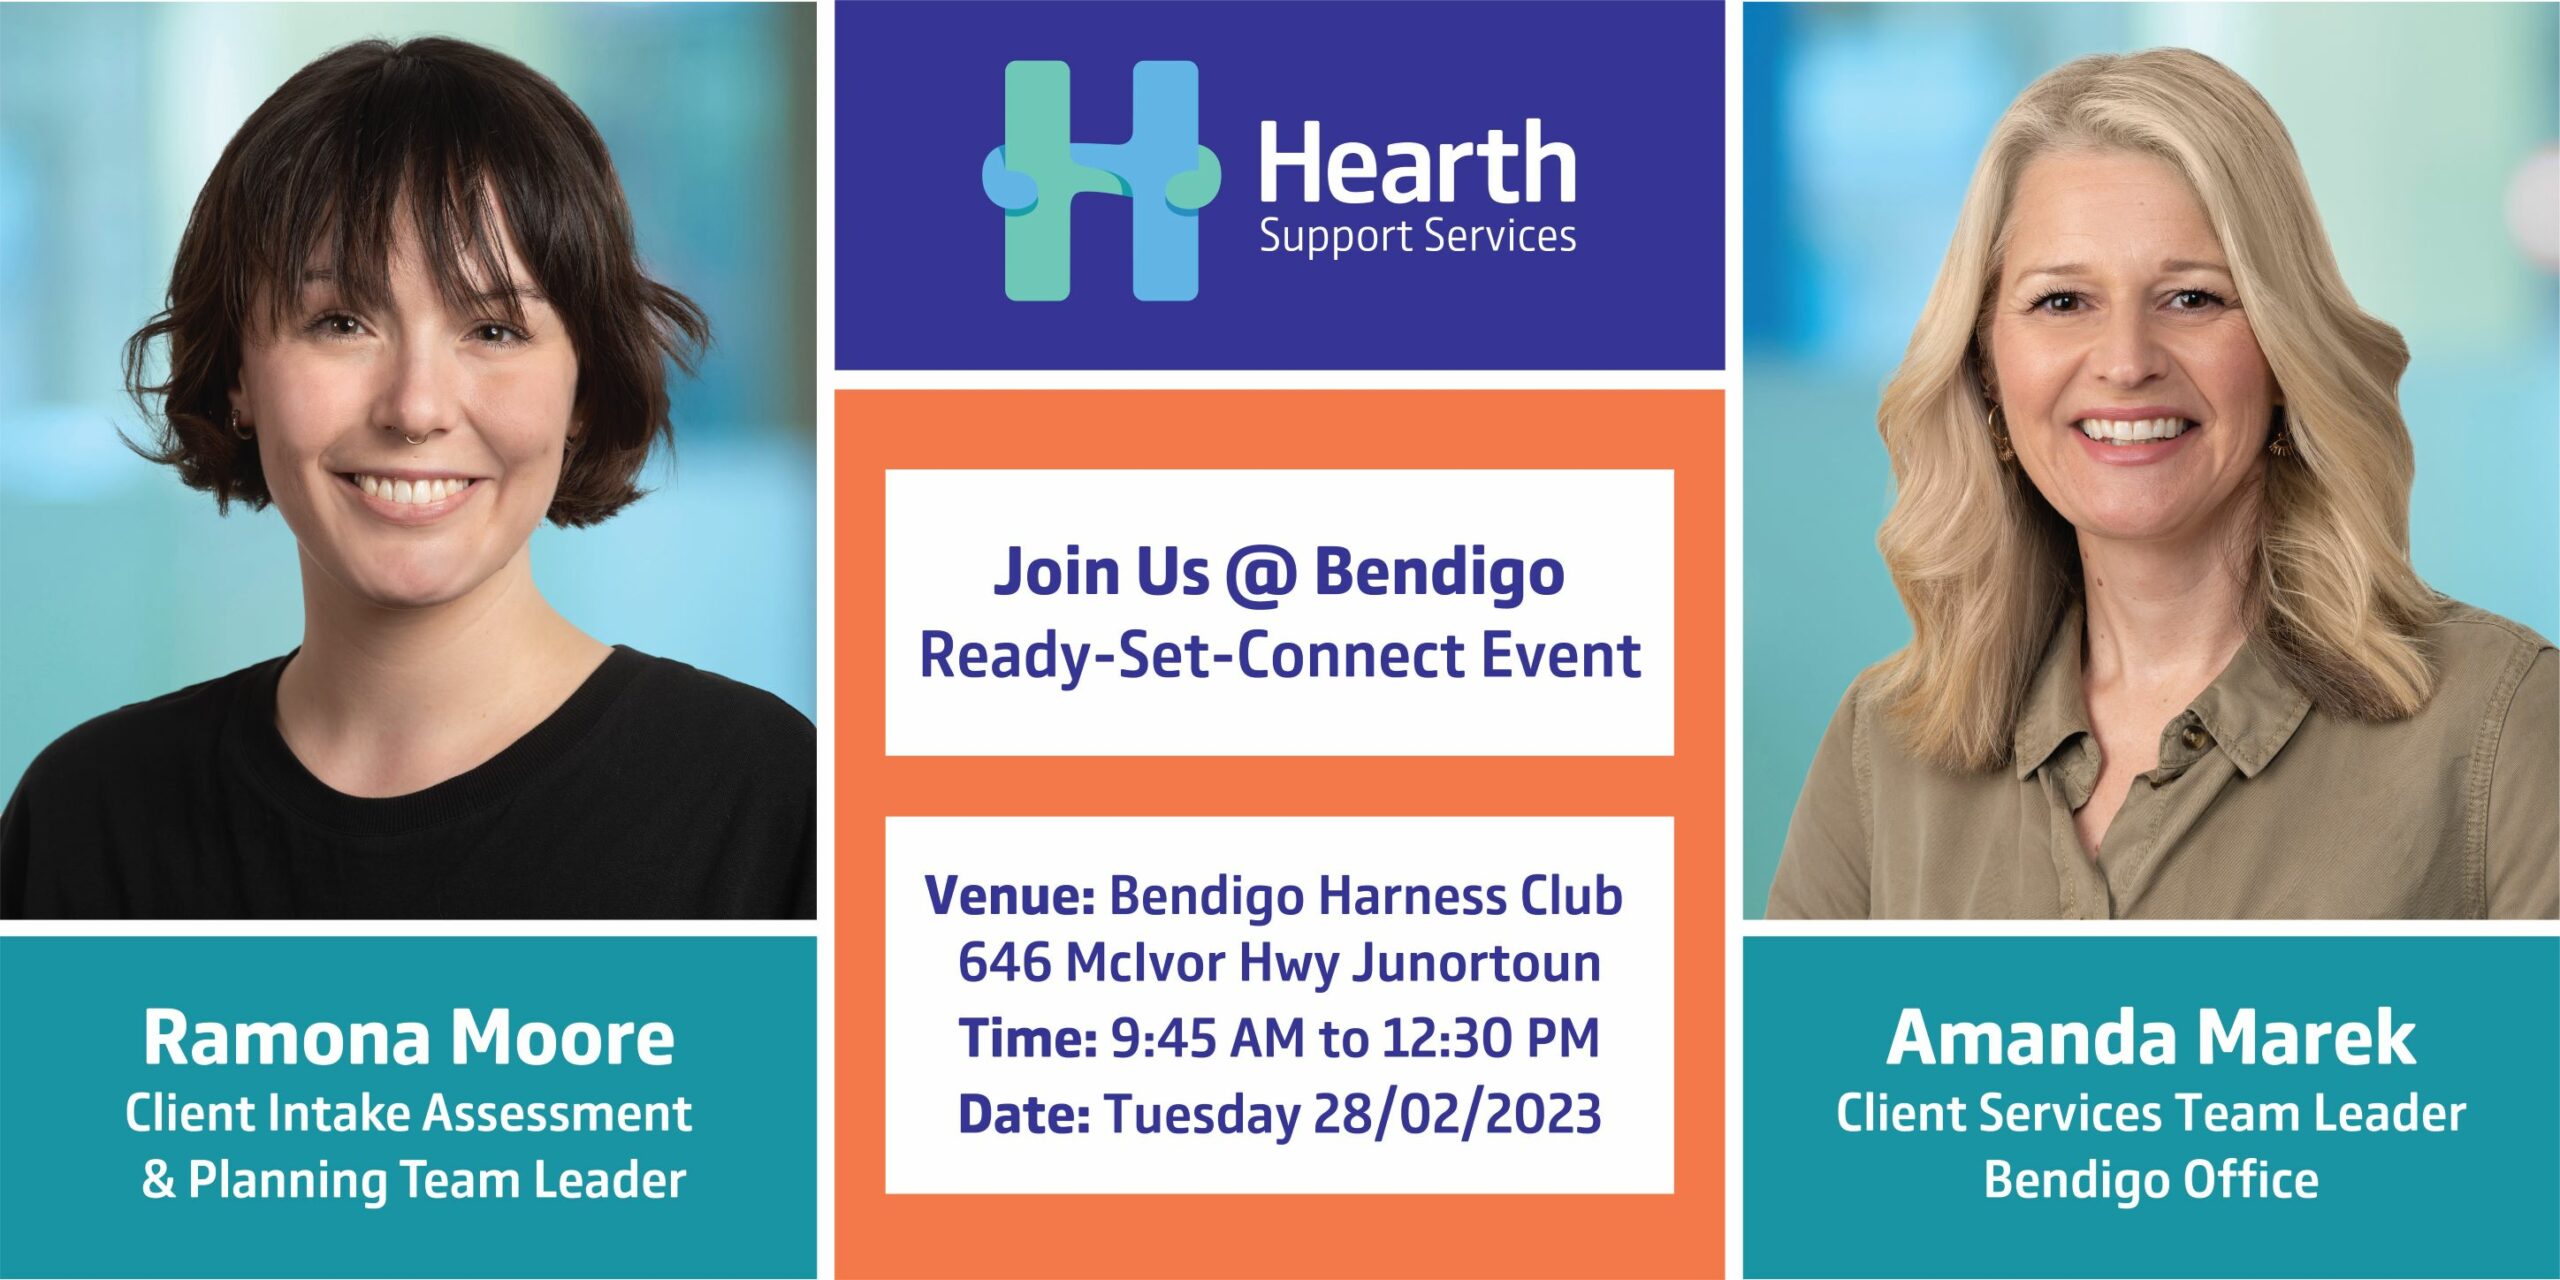 Join Hearth Support Services @ Bendigo Ready-Set-Connect Event